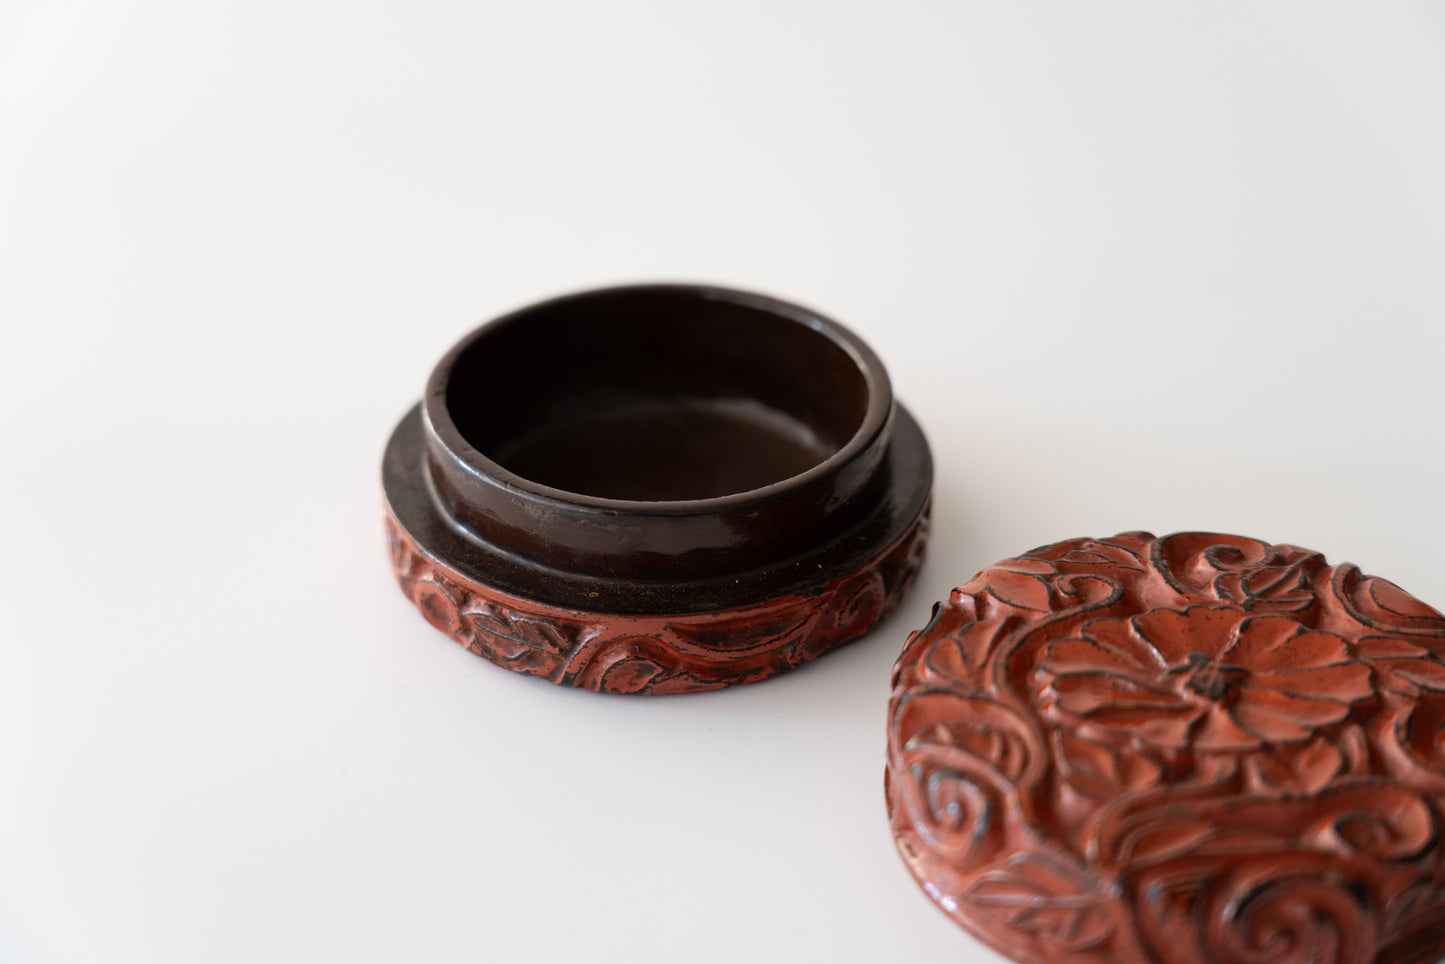 Lacquered incense container with peony design in wood carving